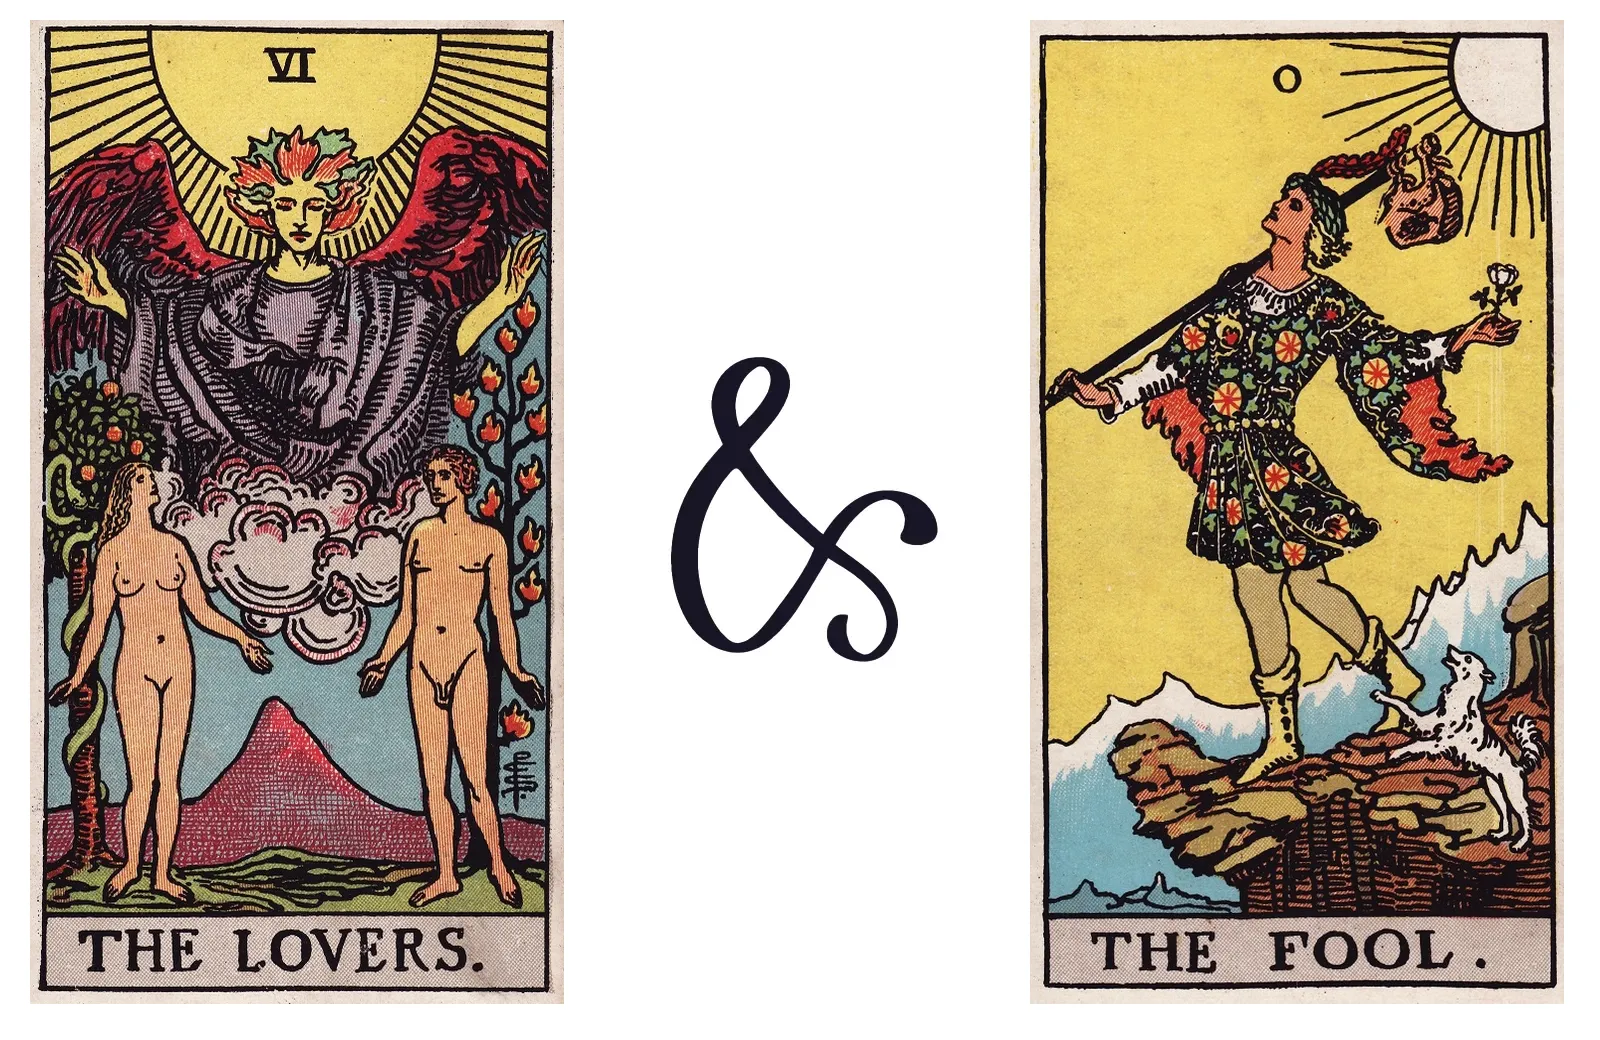 The Lovers and The Fool